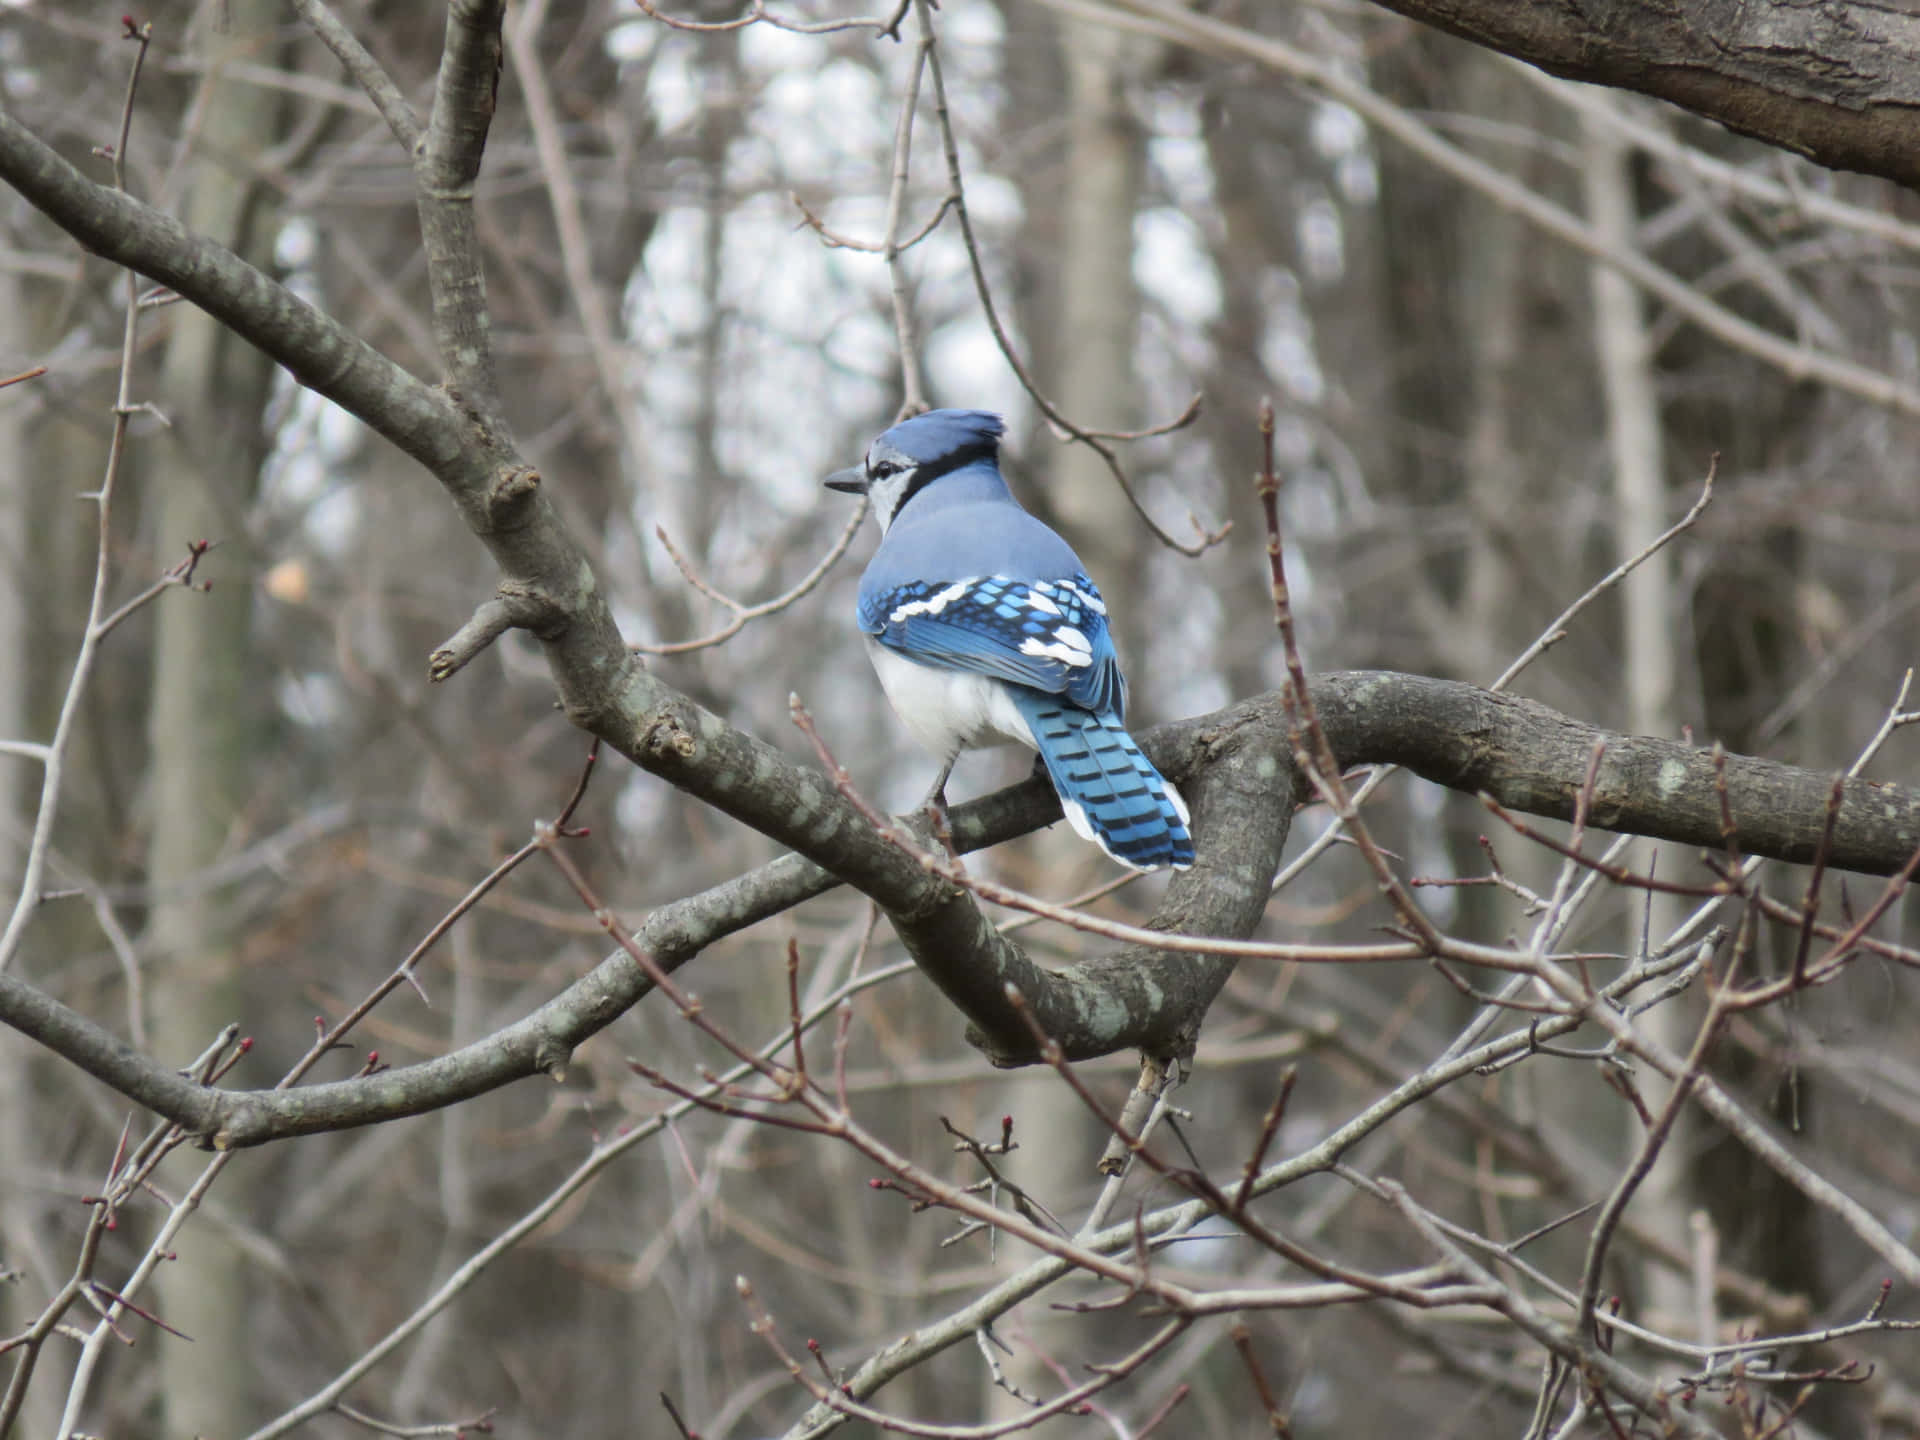 A Blue Jay perched on a Branch